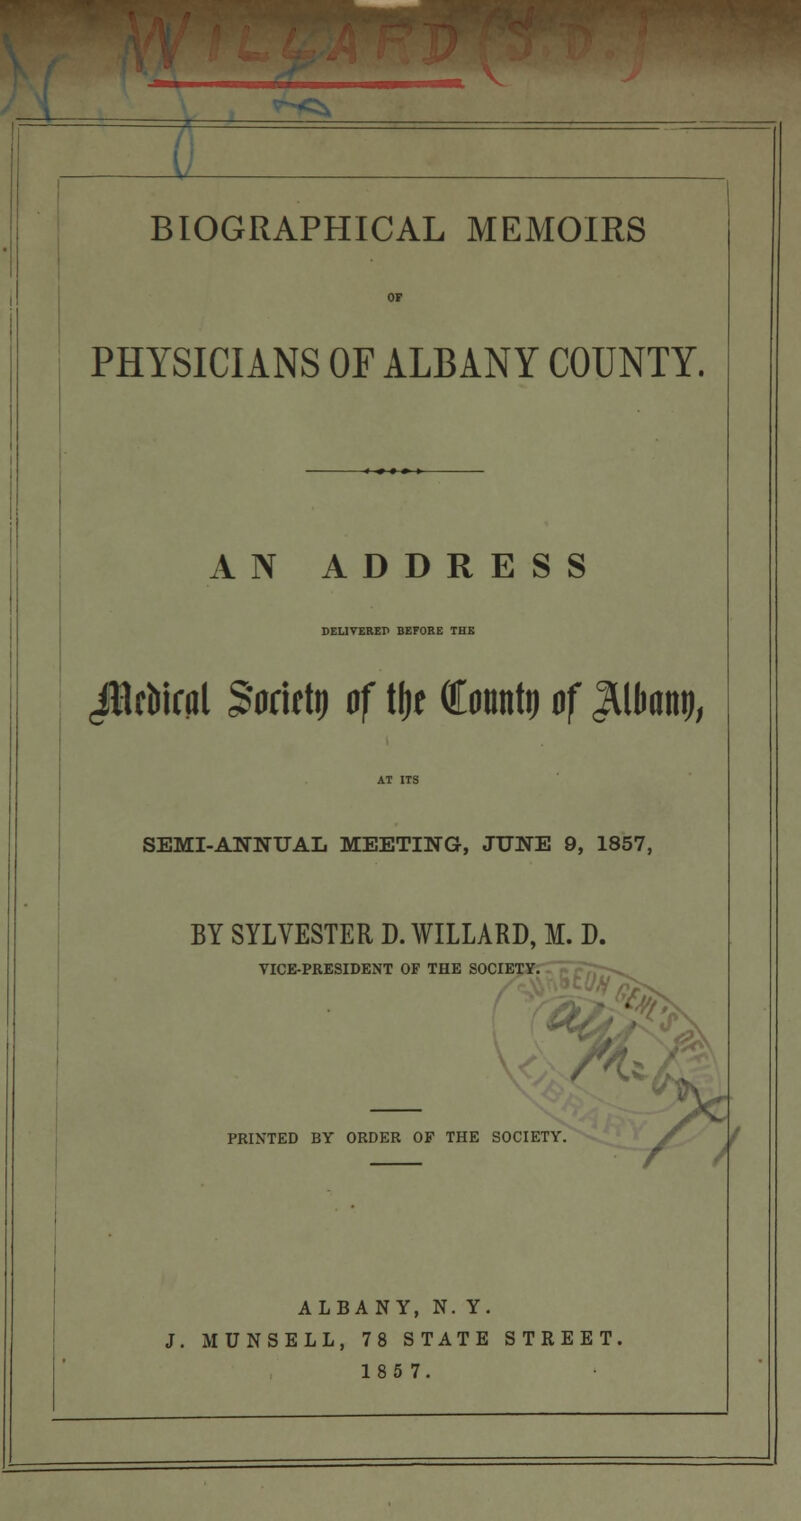 __^ BIOGRAPHICAL MEMOIRS PHYSICIANS OF ALBANY COUNTY. AN ADDRESS DEL1YEREP BEFORE THE ^BcMral Socitlt) of tfje Count!) of ^llwnt), SEMI-ANNUAL MEETING, JUNE 9, 1857, BY SYLVESTER D. WILLARD, M. D. VICE-PRESIDENT OF THE SOCIETY. .',y a^ %d PRINTED BY ORDER OF THE SOCIETY. ALBANY, N. Y. J. MUNSELL, 78 STATE STREET. 185 7.